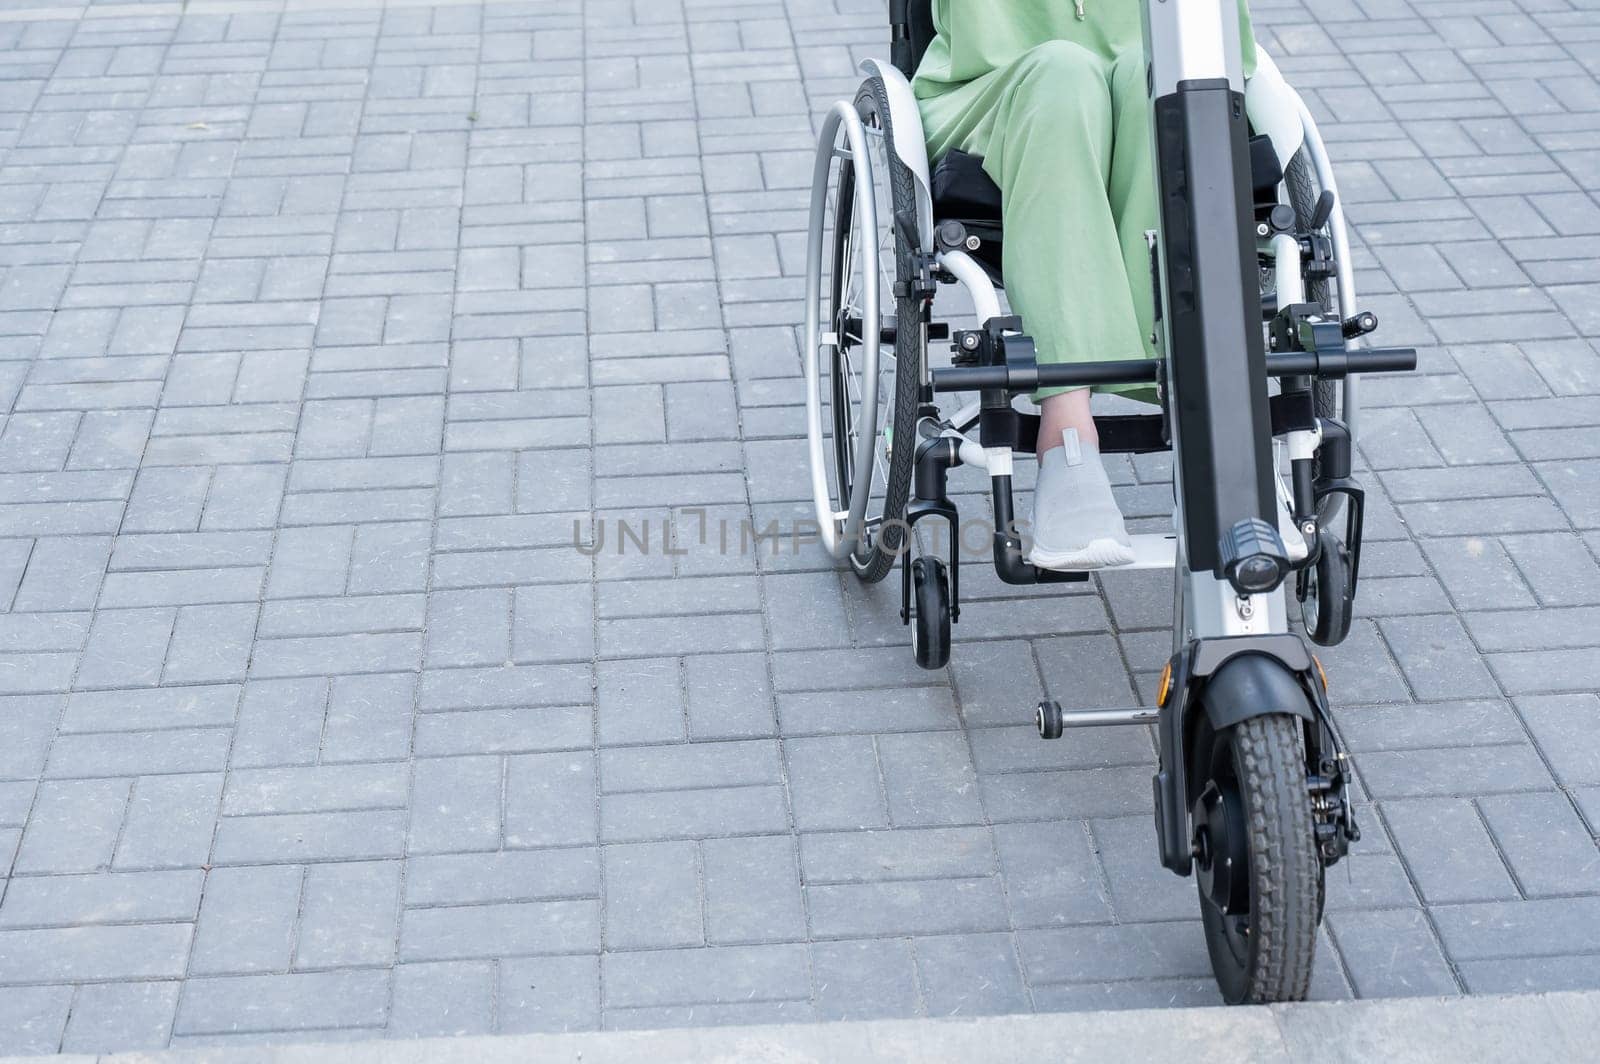 A faceless woman in a wheelchair with an assistive device for manual control. Electric handbike